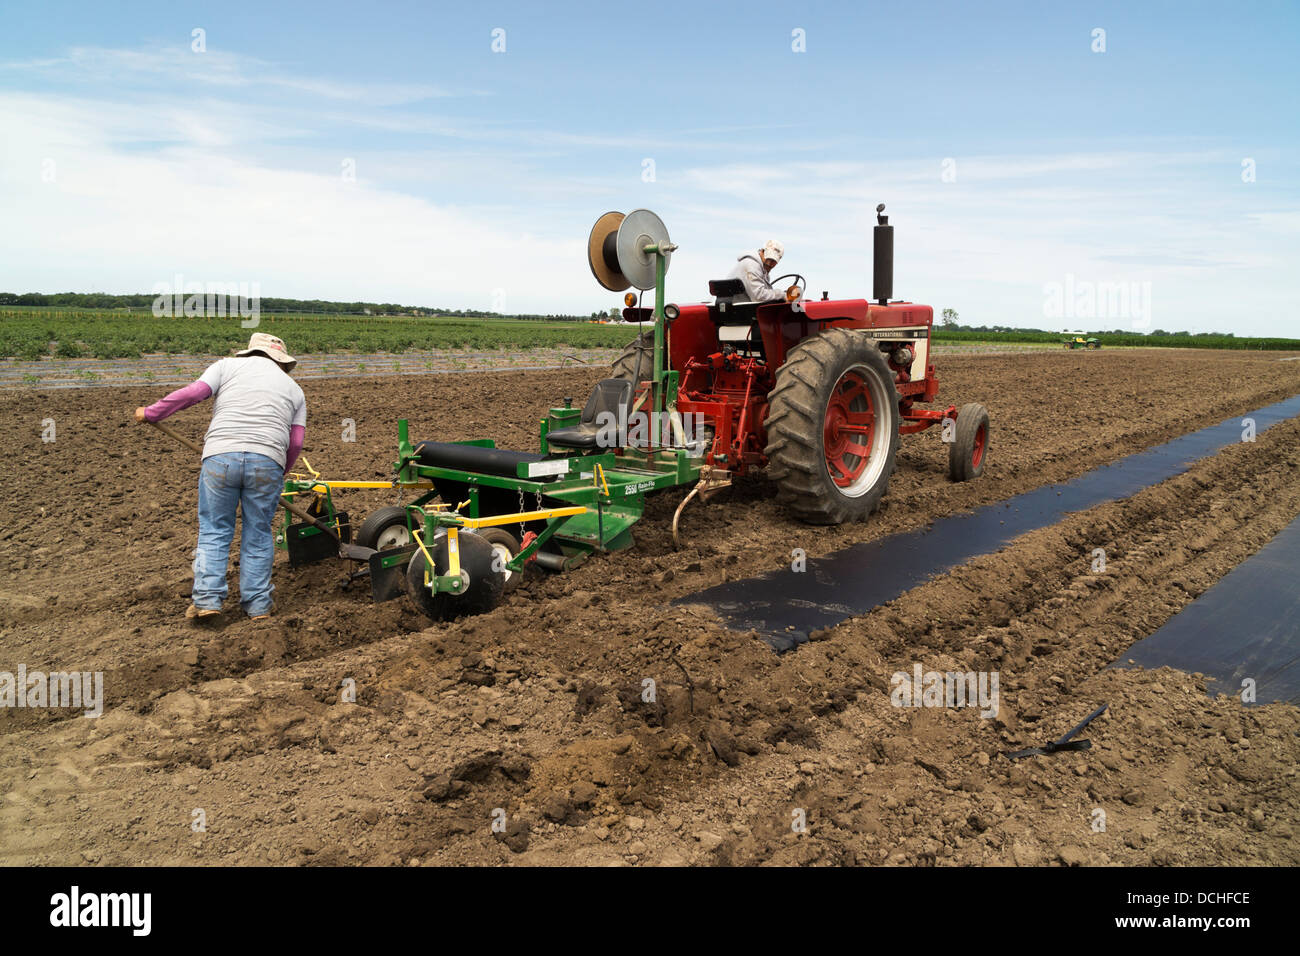 Laying plastic sheeting in preparation for planting cucumbers. Stock Photo